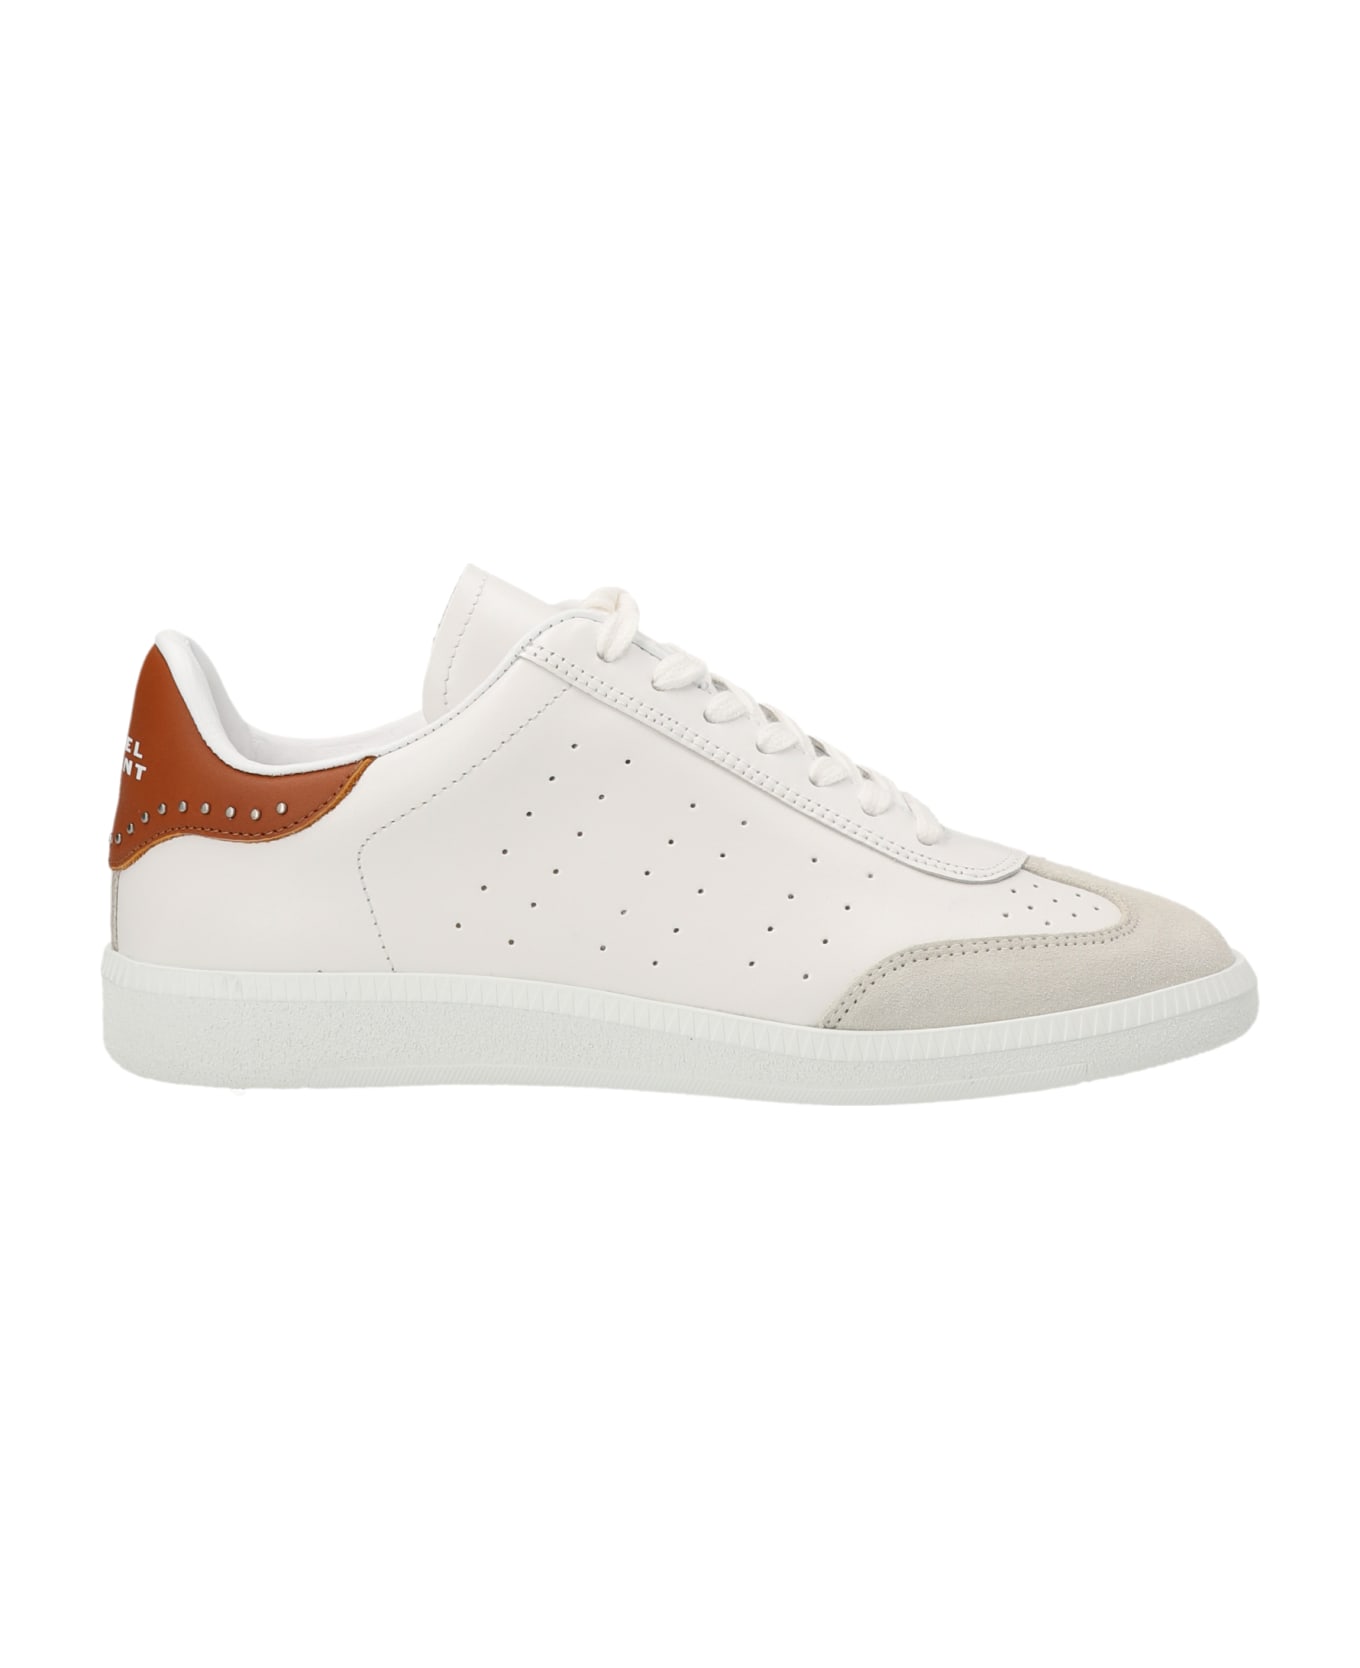 Isabel Marant 'bryce' Sneakers - Leather Brown